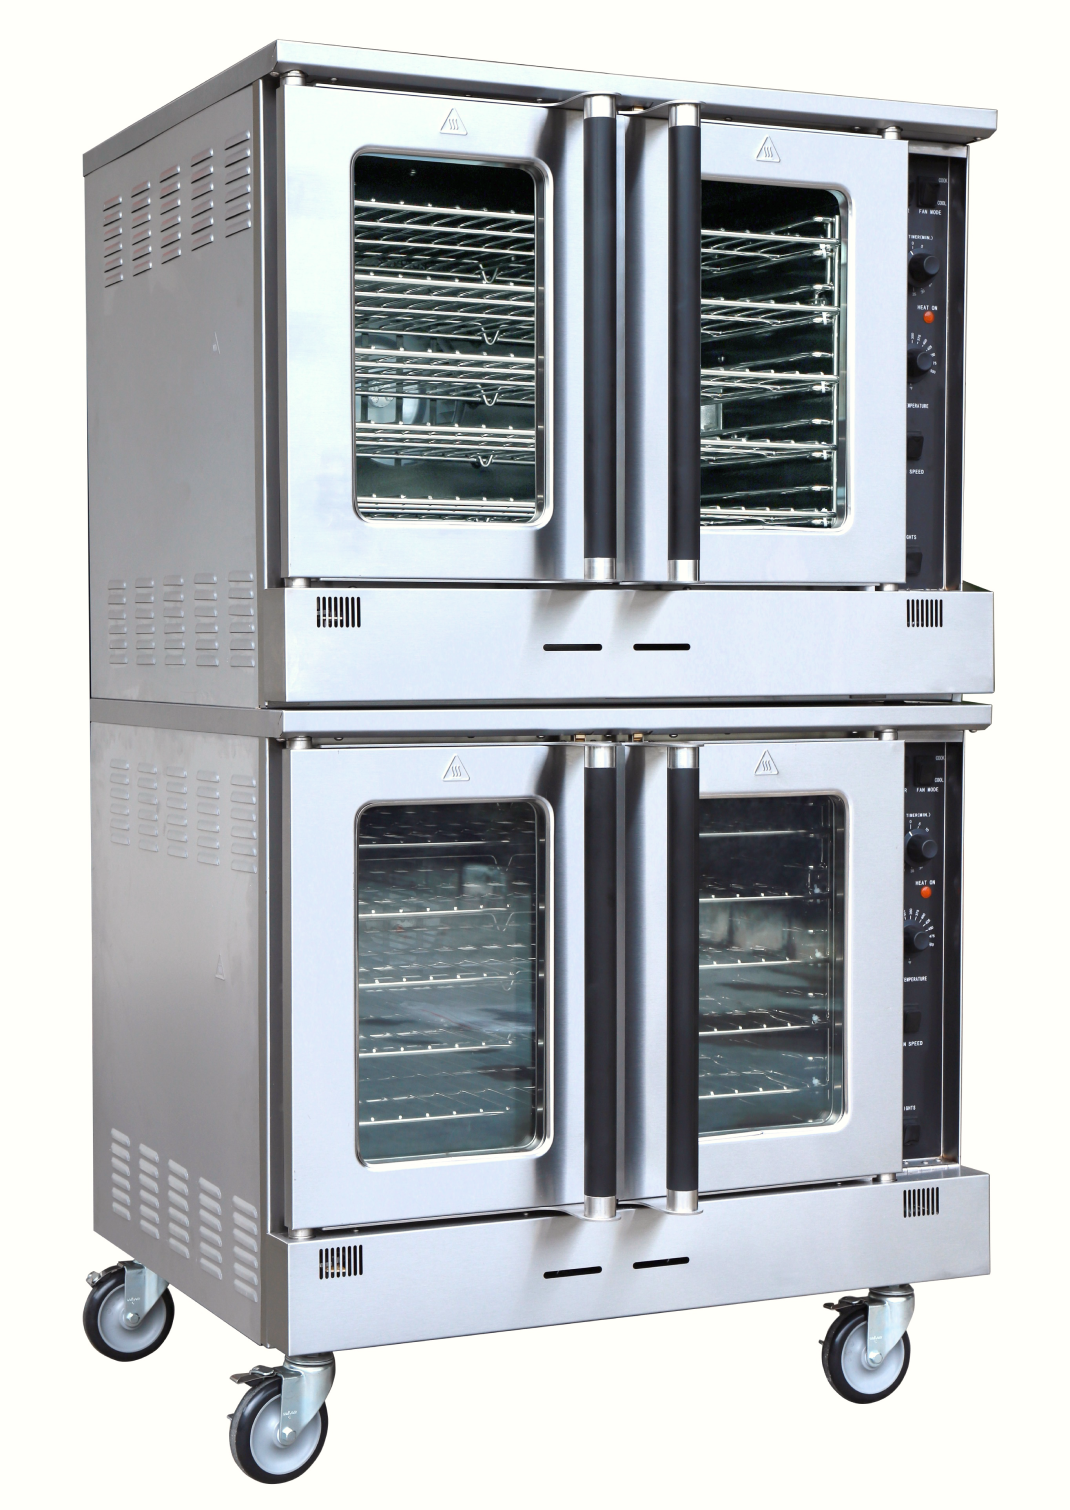 EASYROSE Commercial Convection Oven Double Deck Natural Gas Commercial Ovens for Bakery Kitchen Restaurant, 60,000 BTU